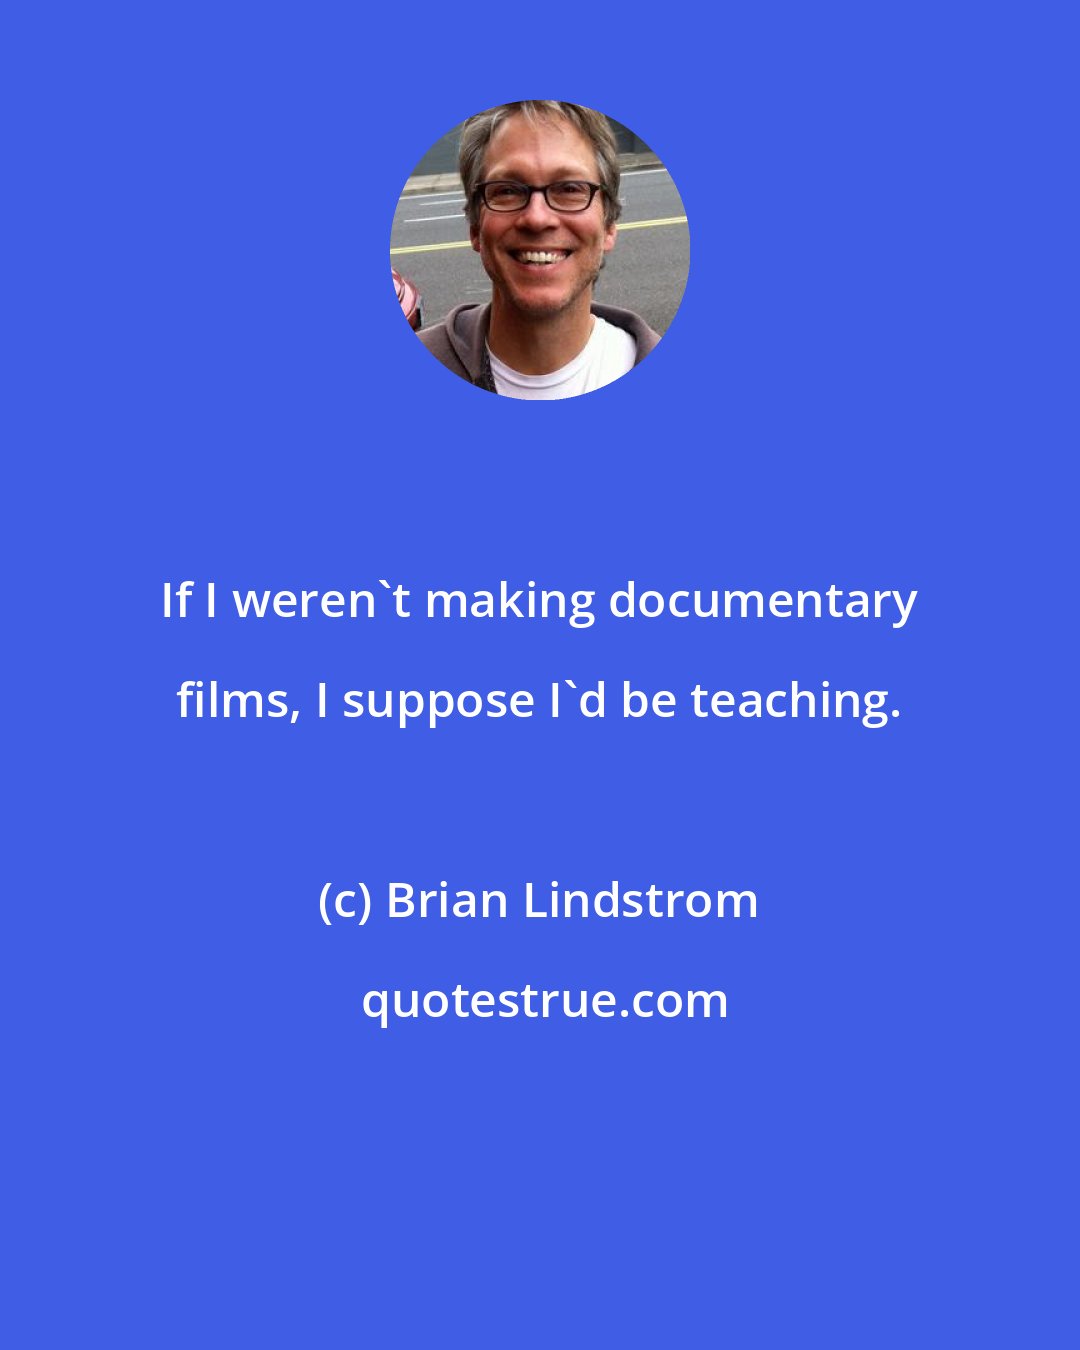 Brian Lindstrom: If I weren't making documentary films, I suppose I'd be teaching.